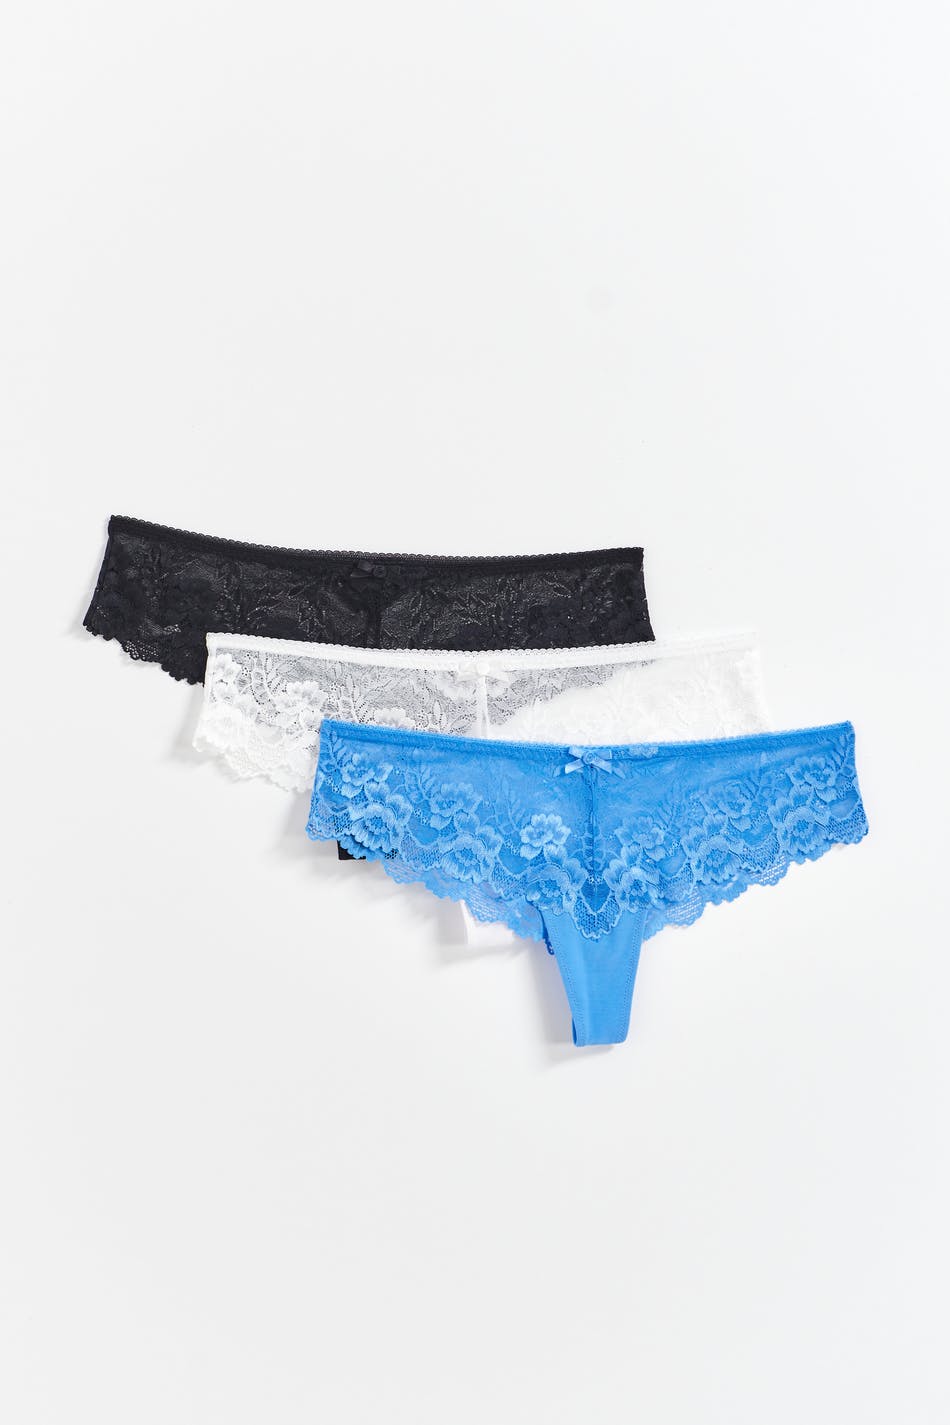  Gina Tricot- 3-pack lace string - Slips- Blue - XL- Female